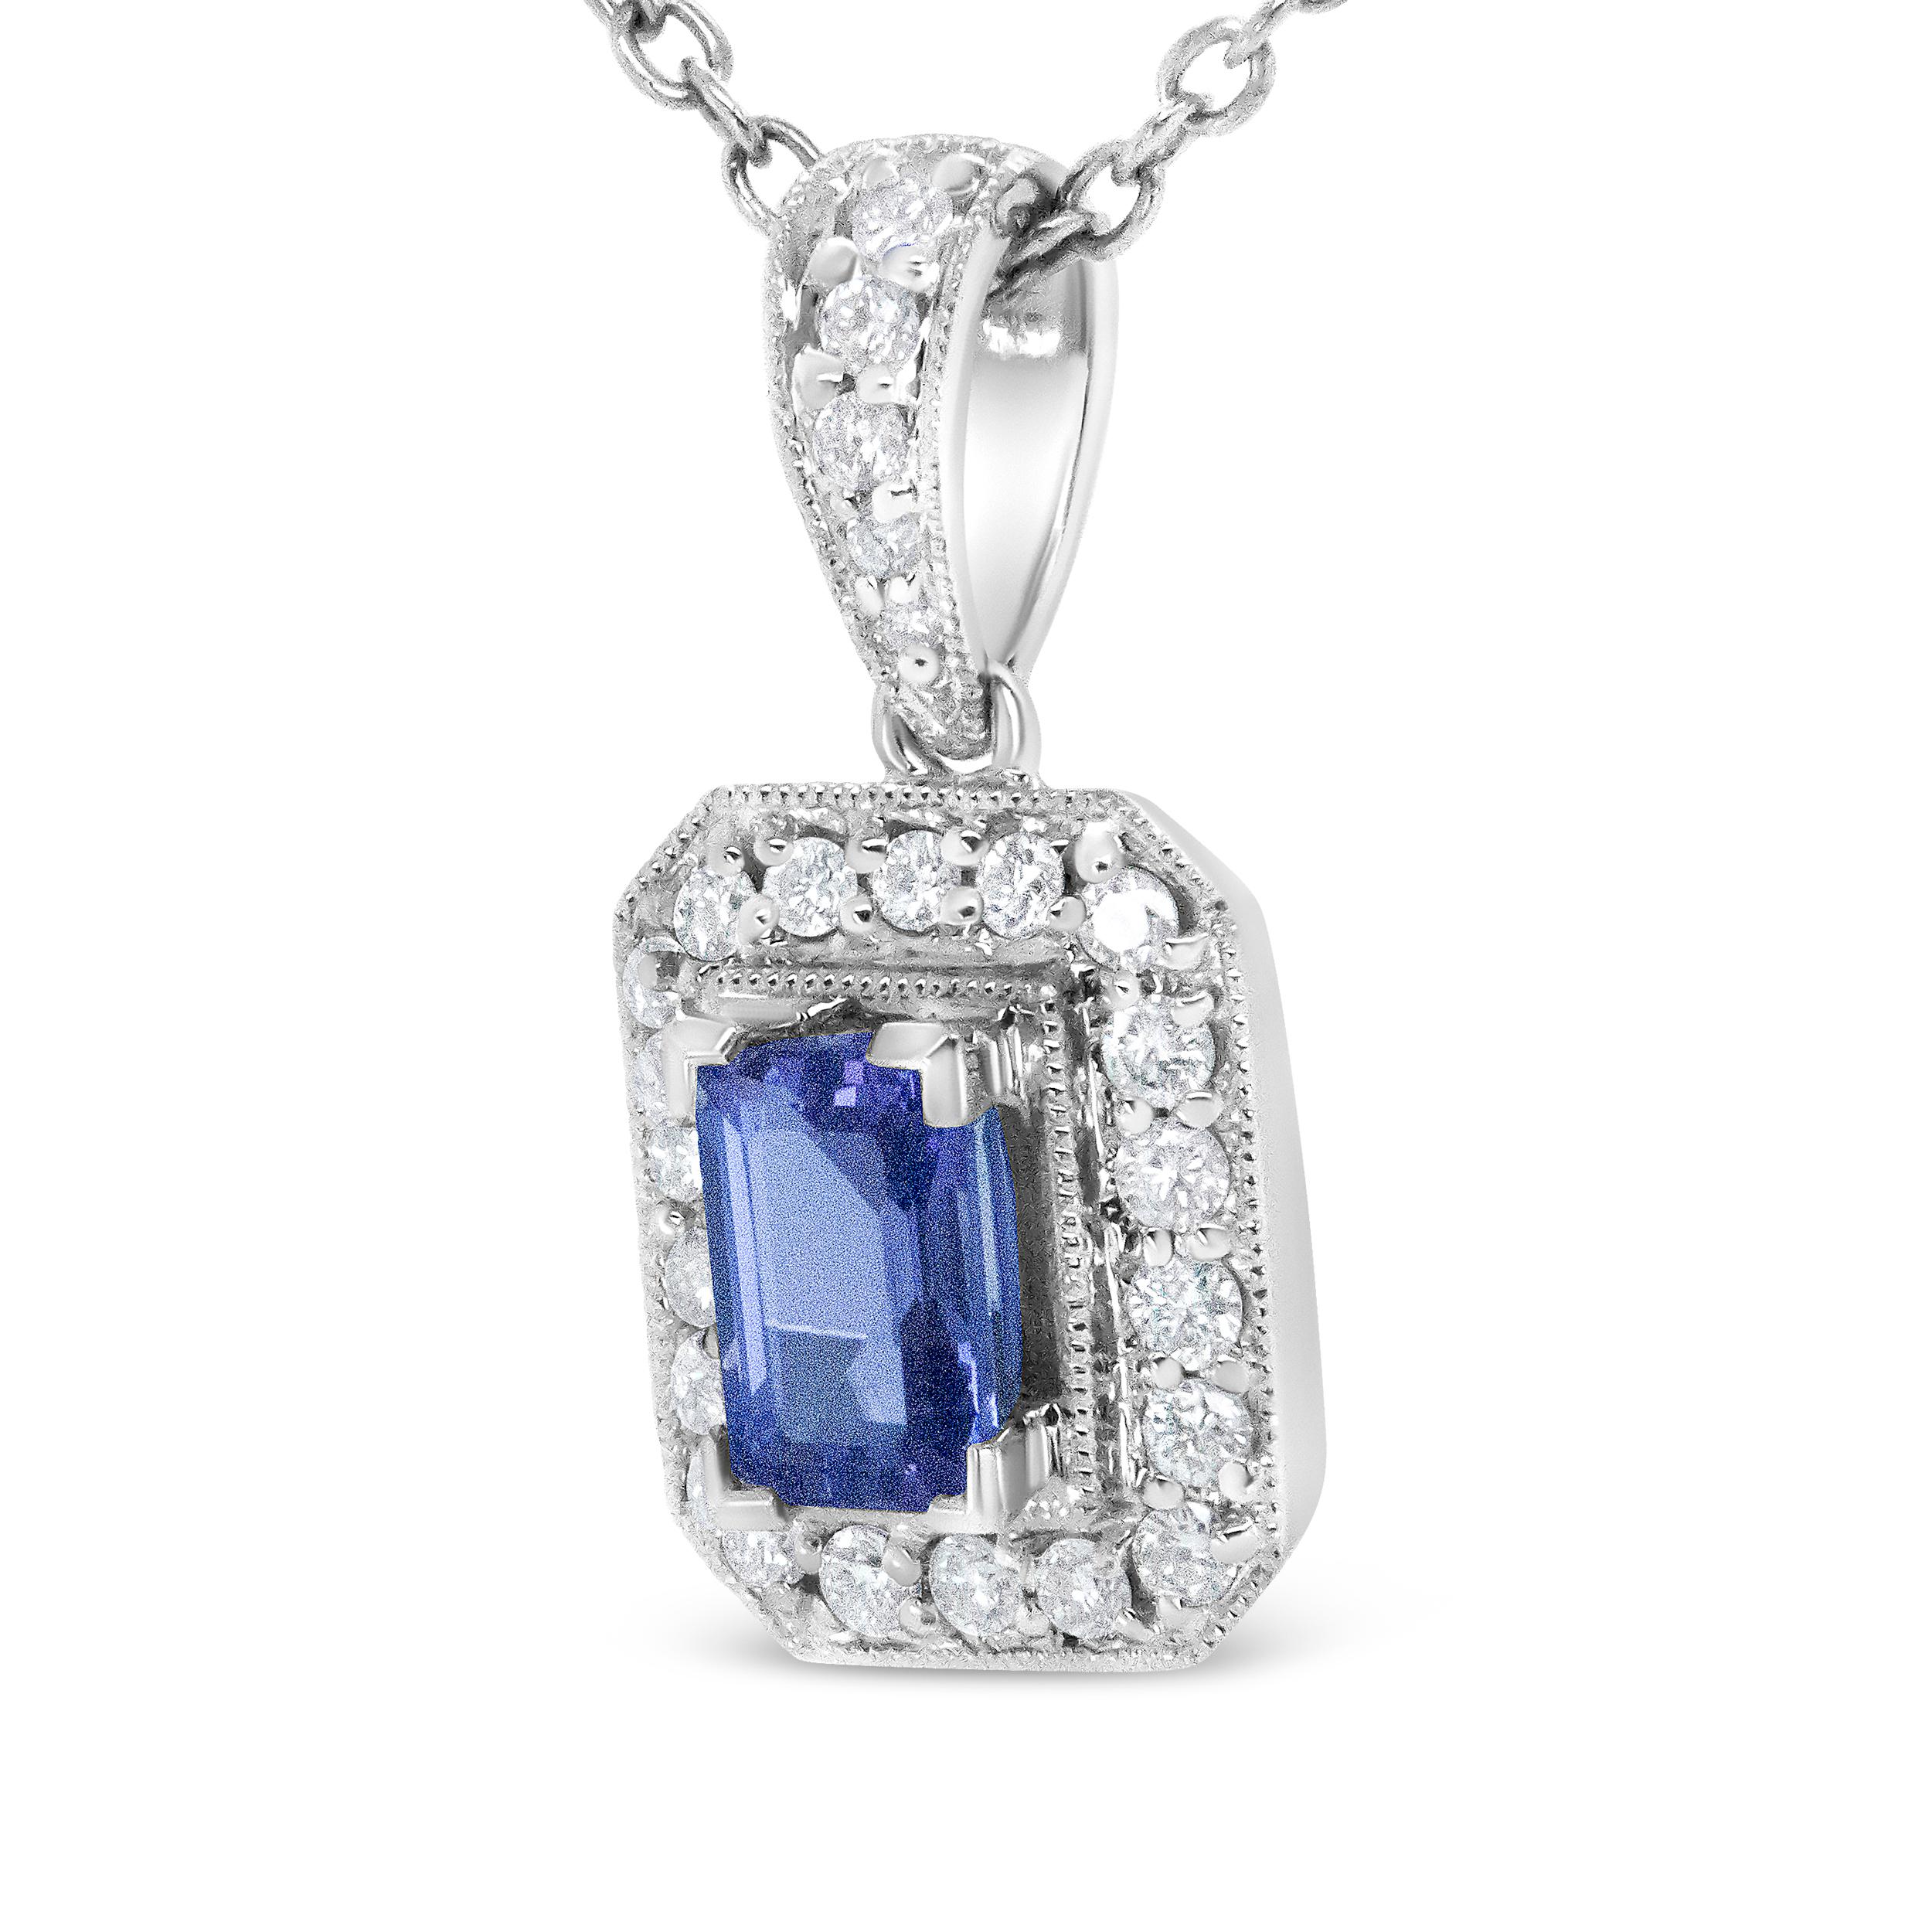 A shimmering 6x4mm emerald-cut purple tanzanite gemstone is surrounded by sparkling round diamonds in pave settings to create this elegant pendant necklace. These glorious white diamonds are set in a halo around the centerpiece gem as well as along